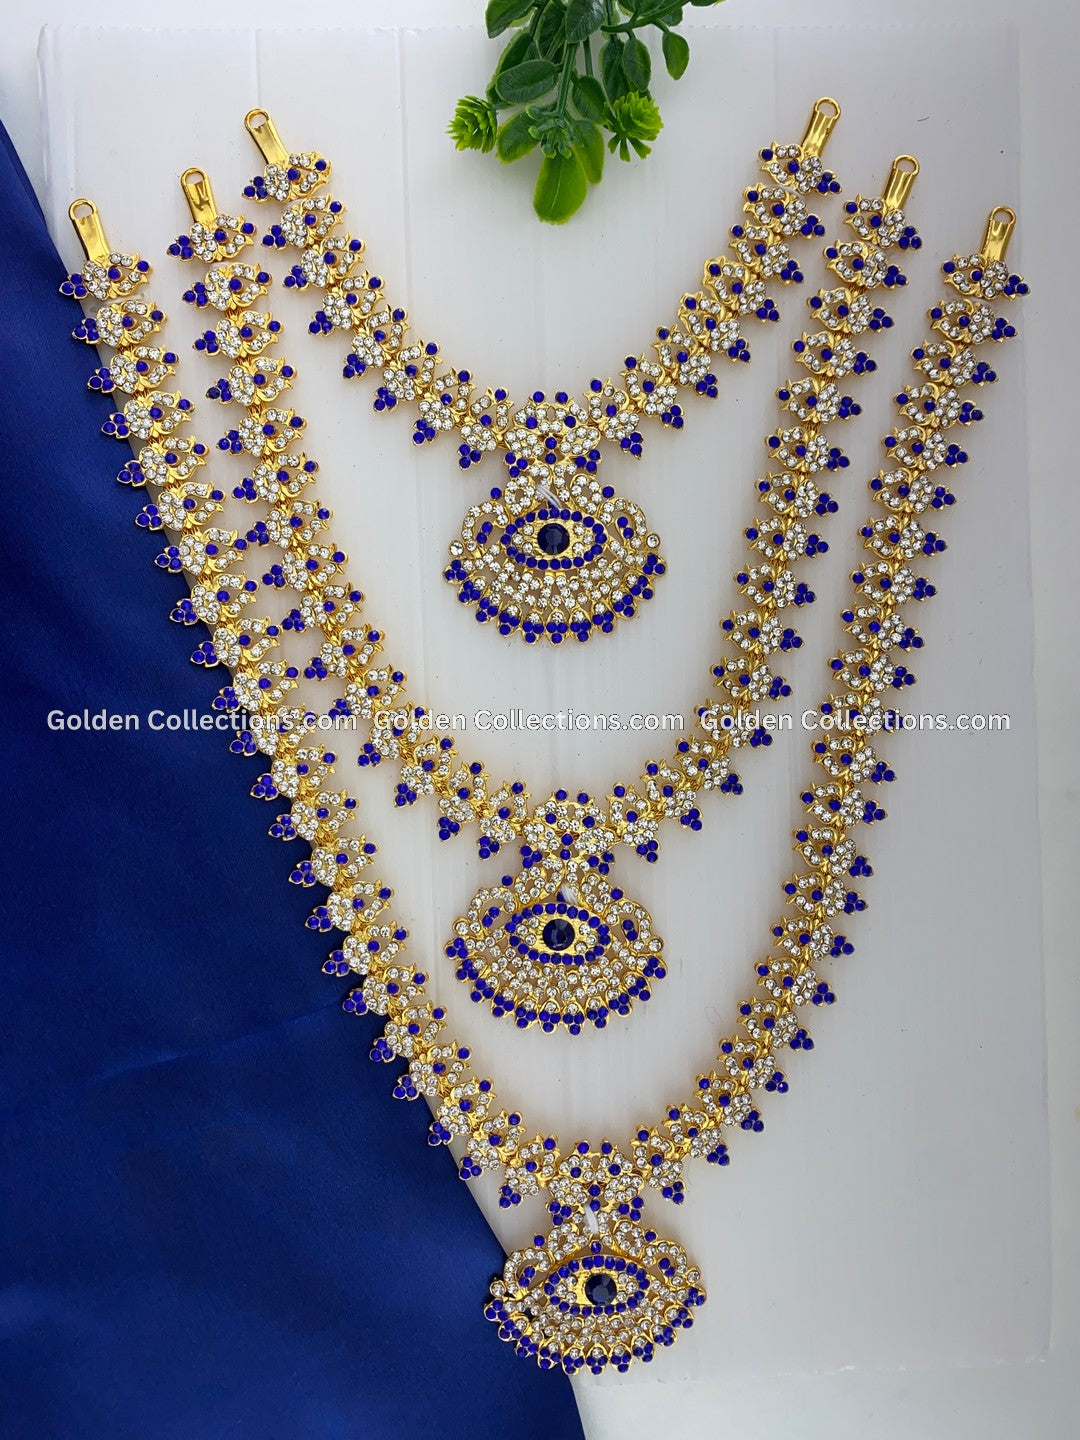 Amman Temple Jewellery Collection - GoldenCollections DLN-019